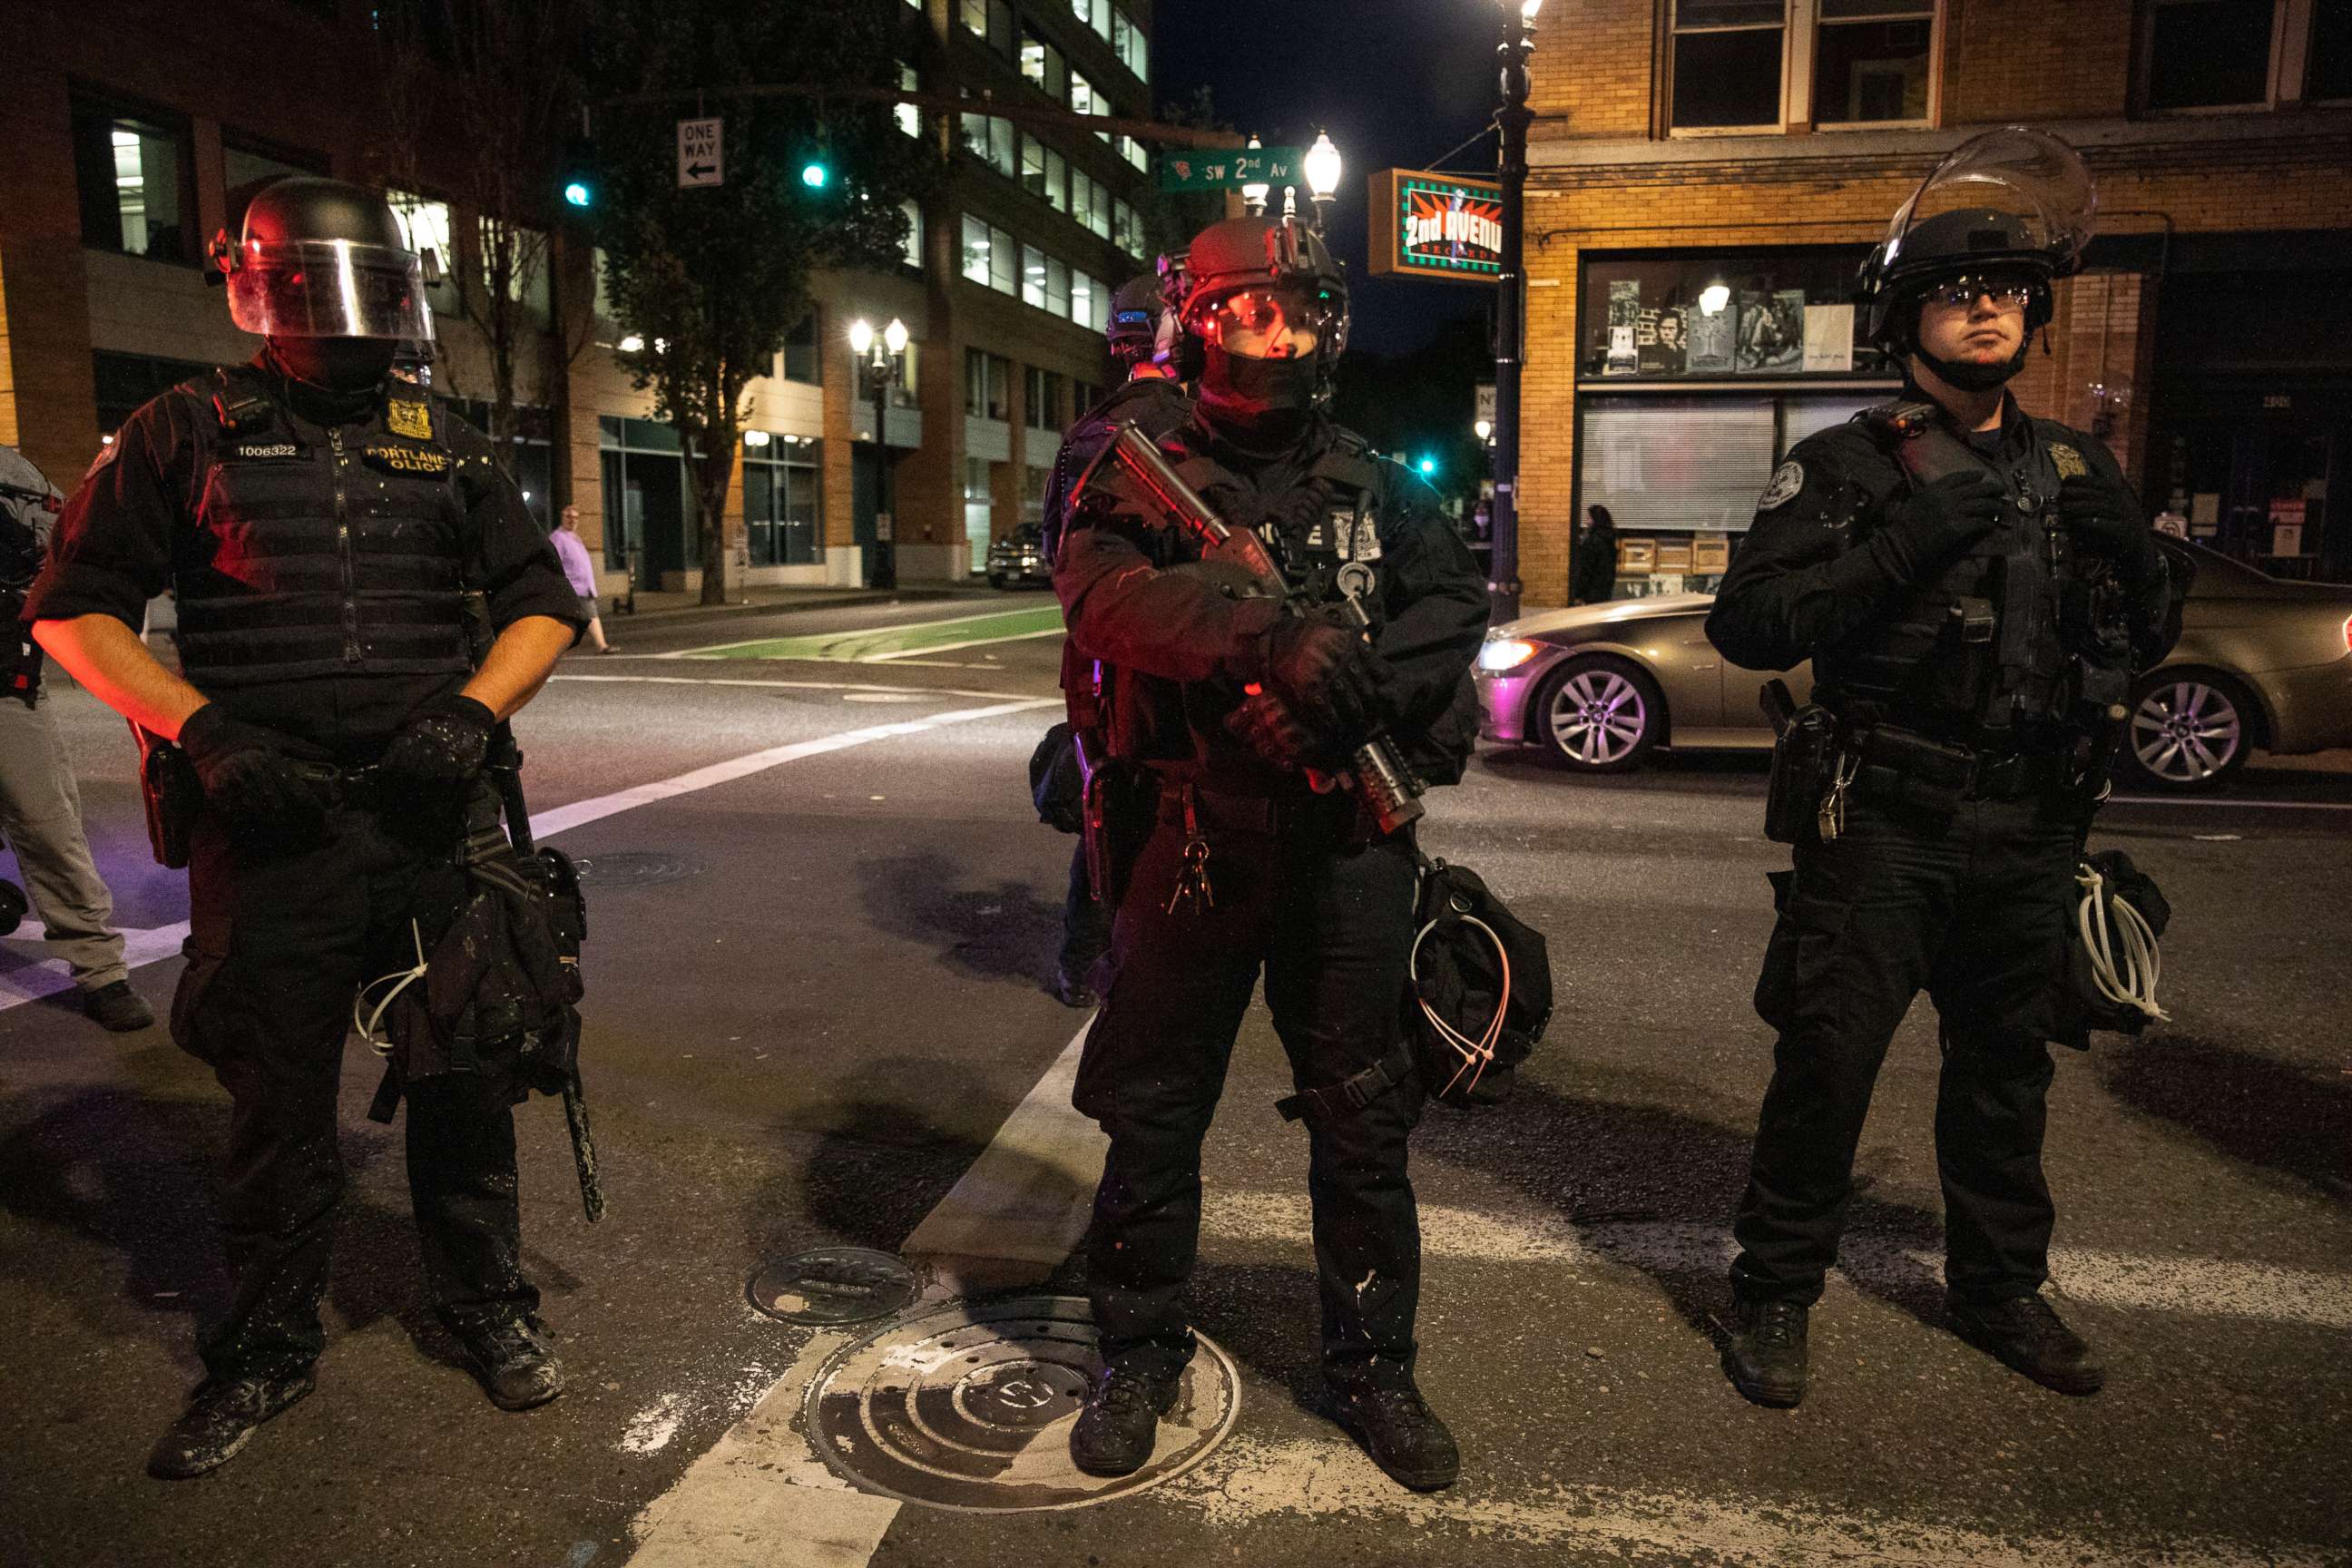 PHOTO: Police stand guard in Portland, Oregon, on Aug. 29, 2020.